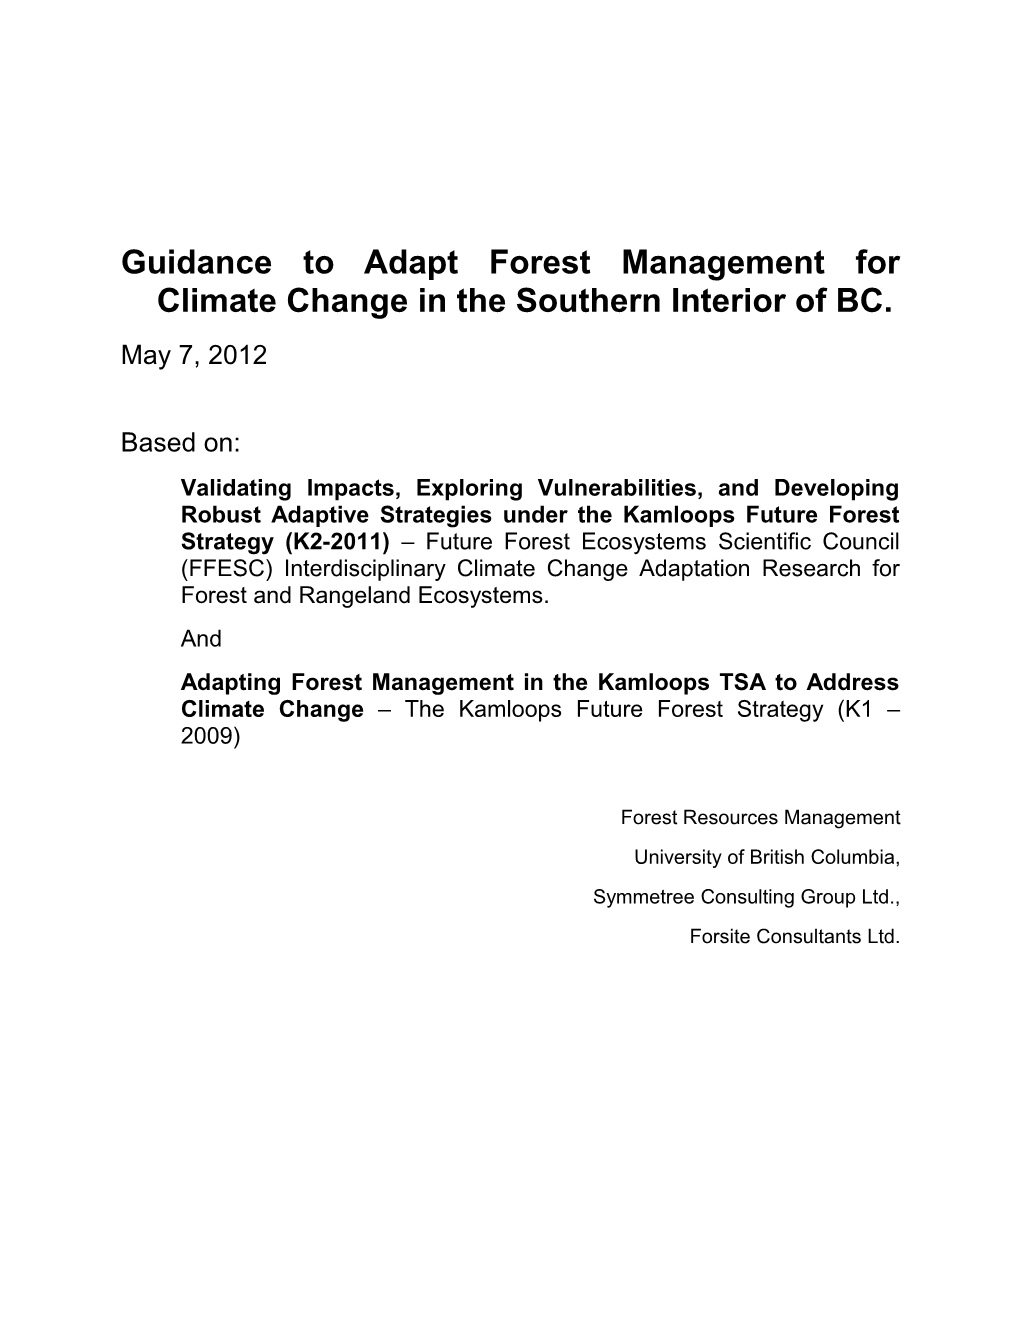 Guidance to Adapt Forest Management for Climate Change in the Southern Interior of BC